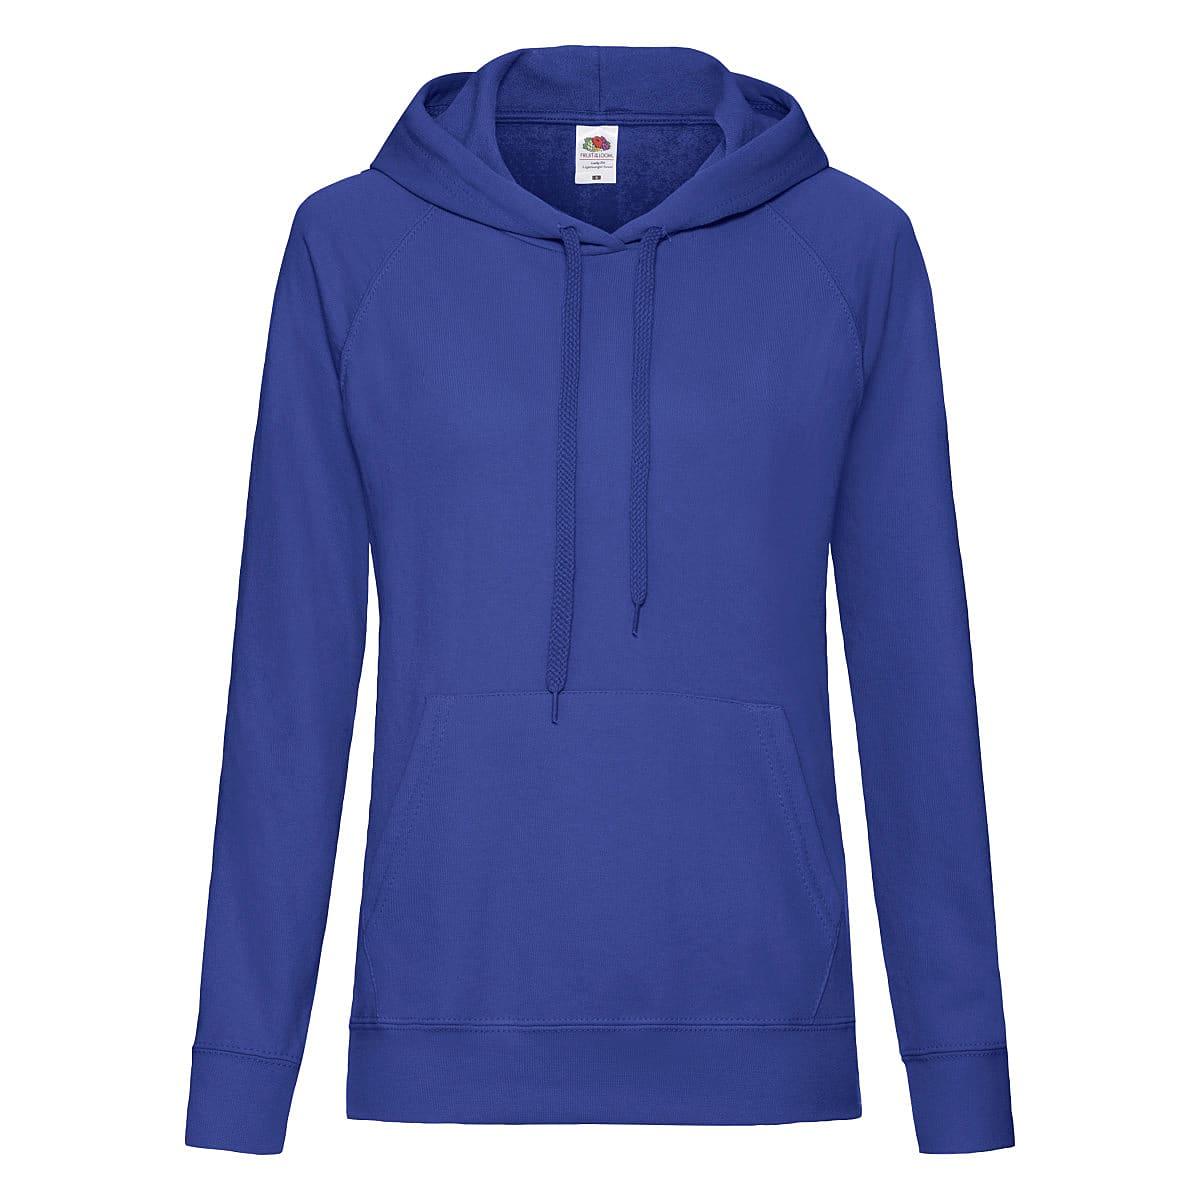 Fruit Of The Loom Lady-Fit Lightweight Hoodie in Royal Blue (Product Code: 62148)